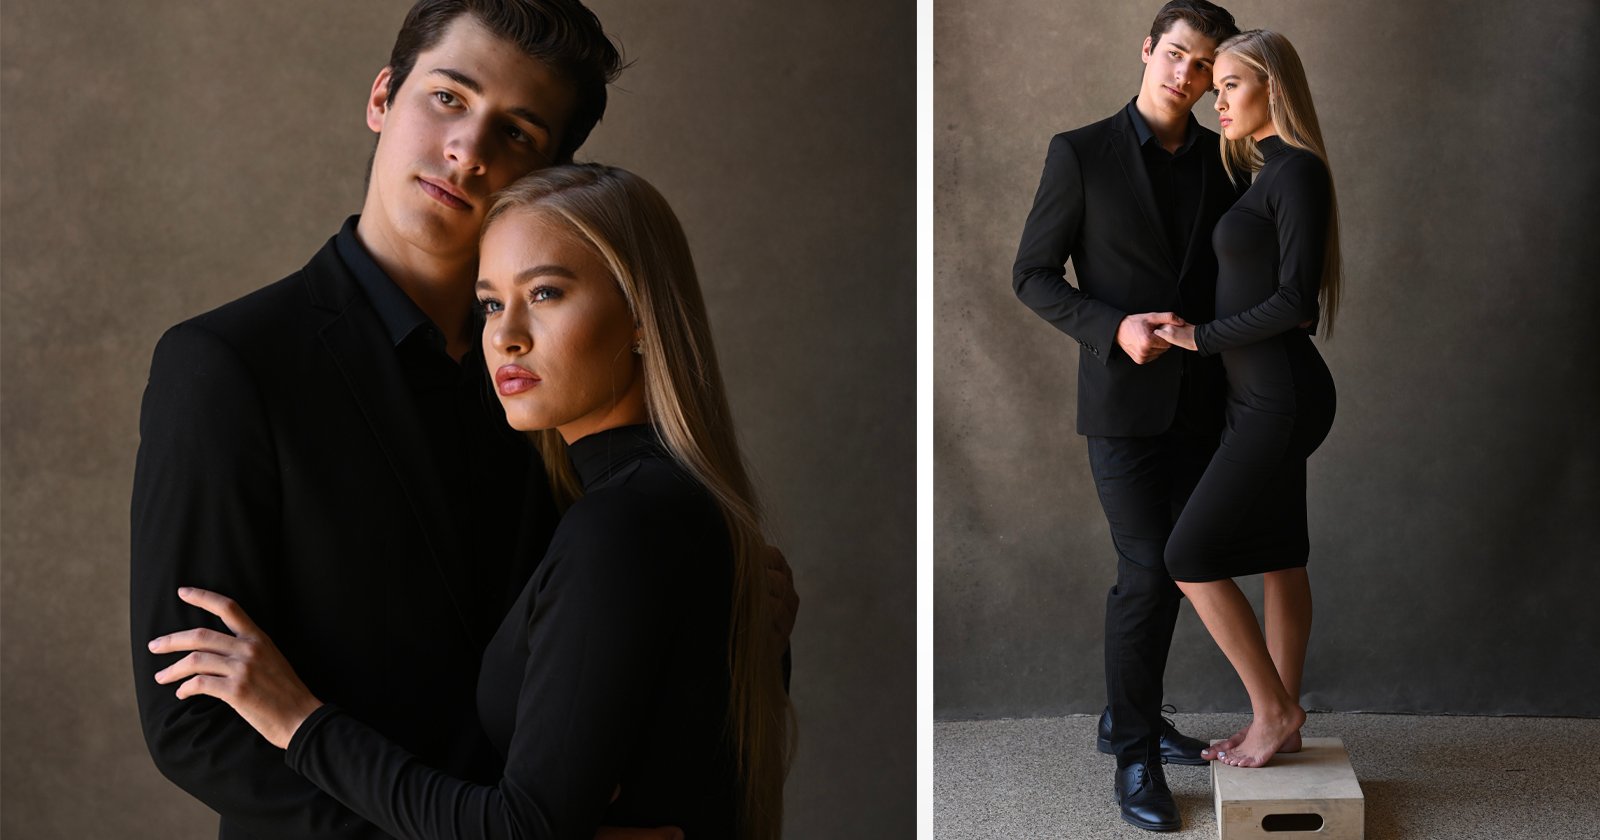 A Detailed Tutorial on How to Pose Couples During Photo Sessions